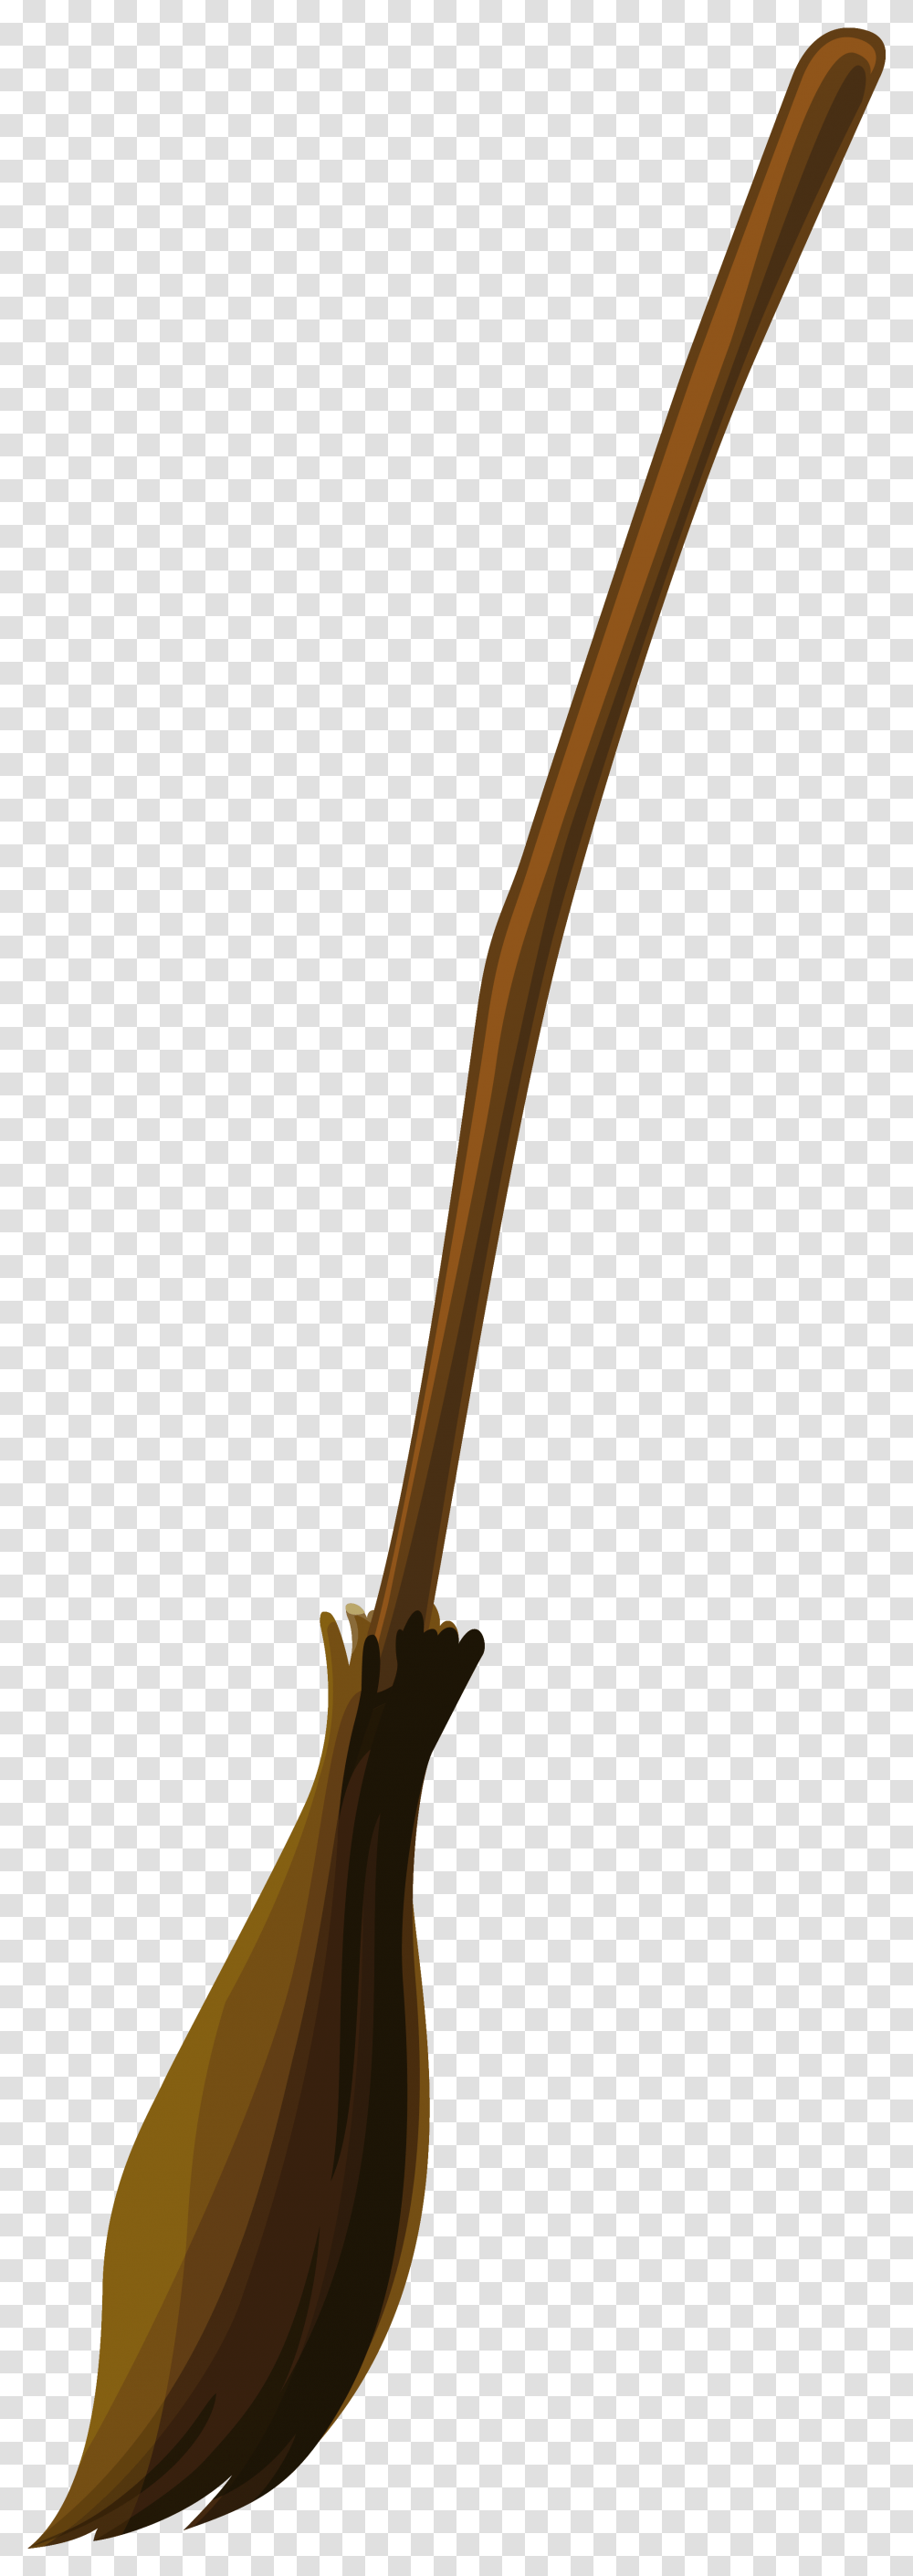 Halloween Witch Broom Clipart Image Witch Broom Clipart, Tool, Shovel, Weapon, Weaponry Transparent Png